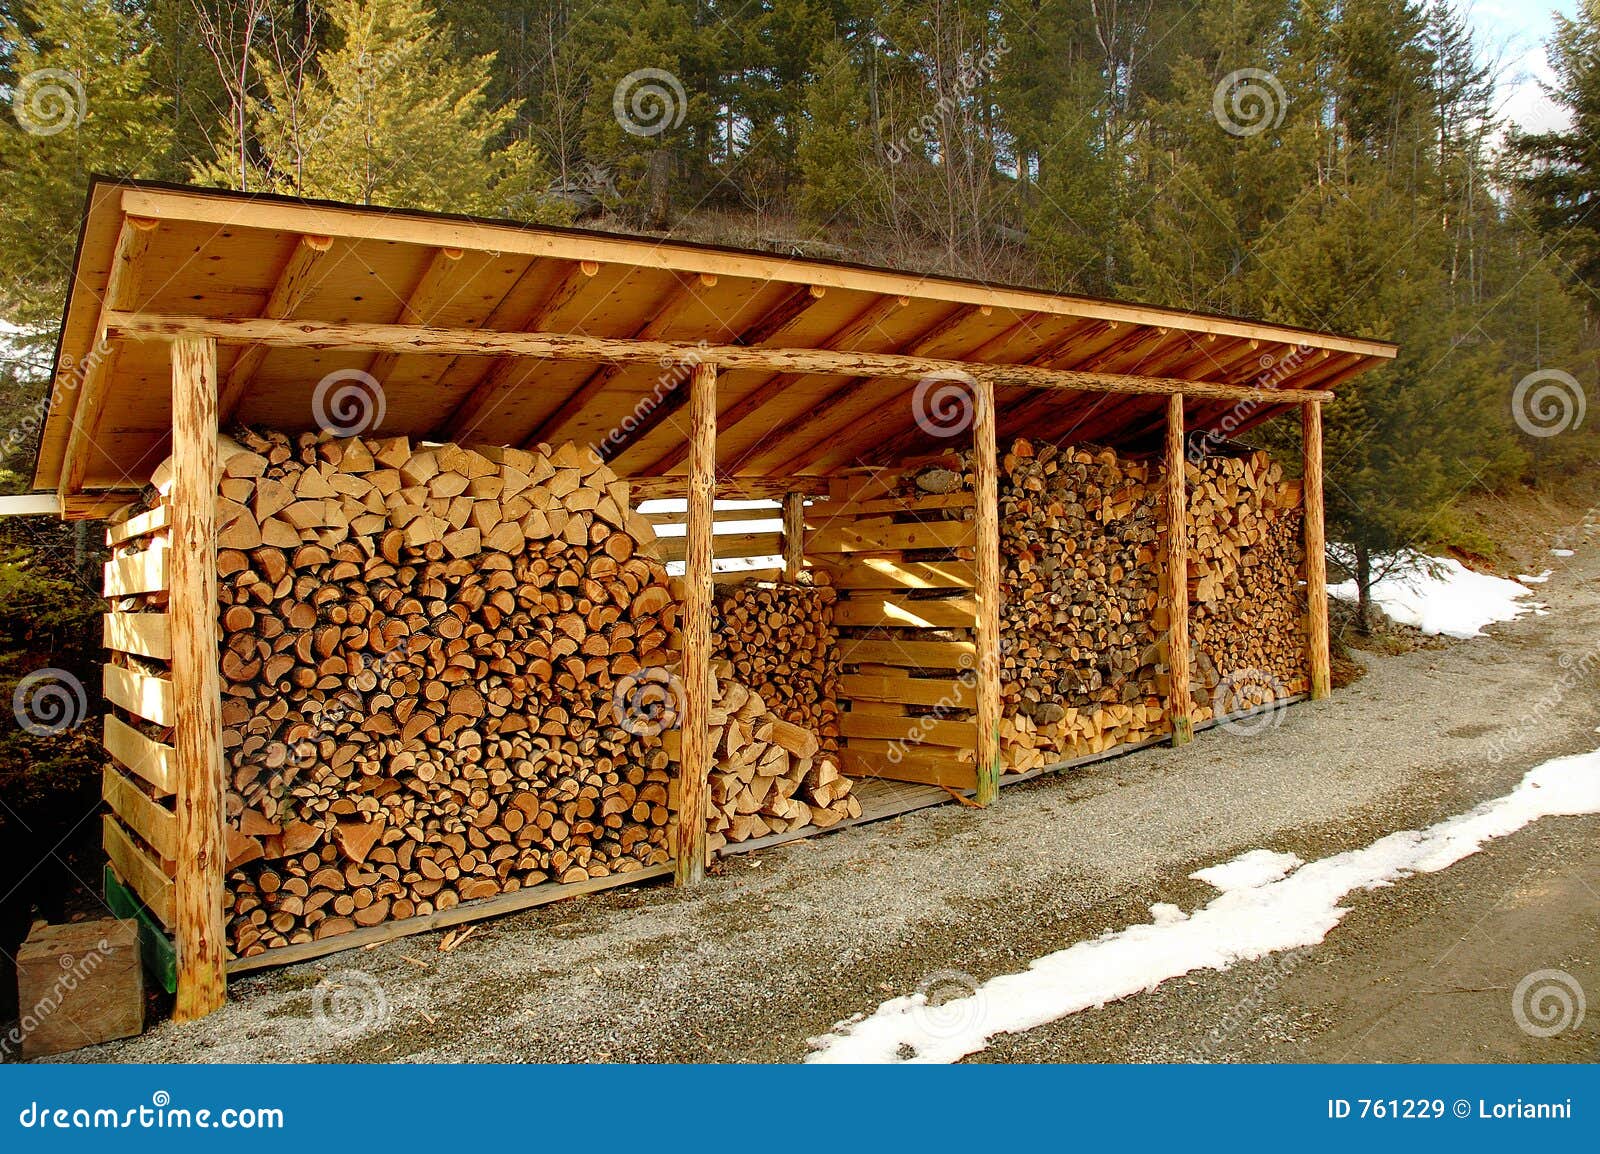 Wood Shed Outdoors Royalty Free Stock Images - Image: 761229